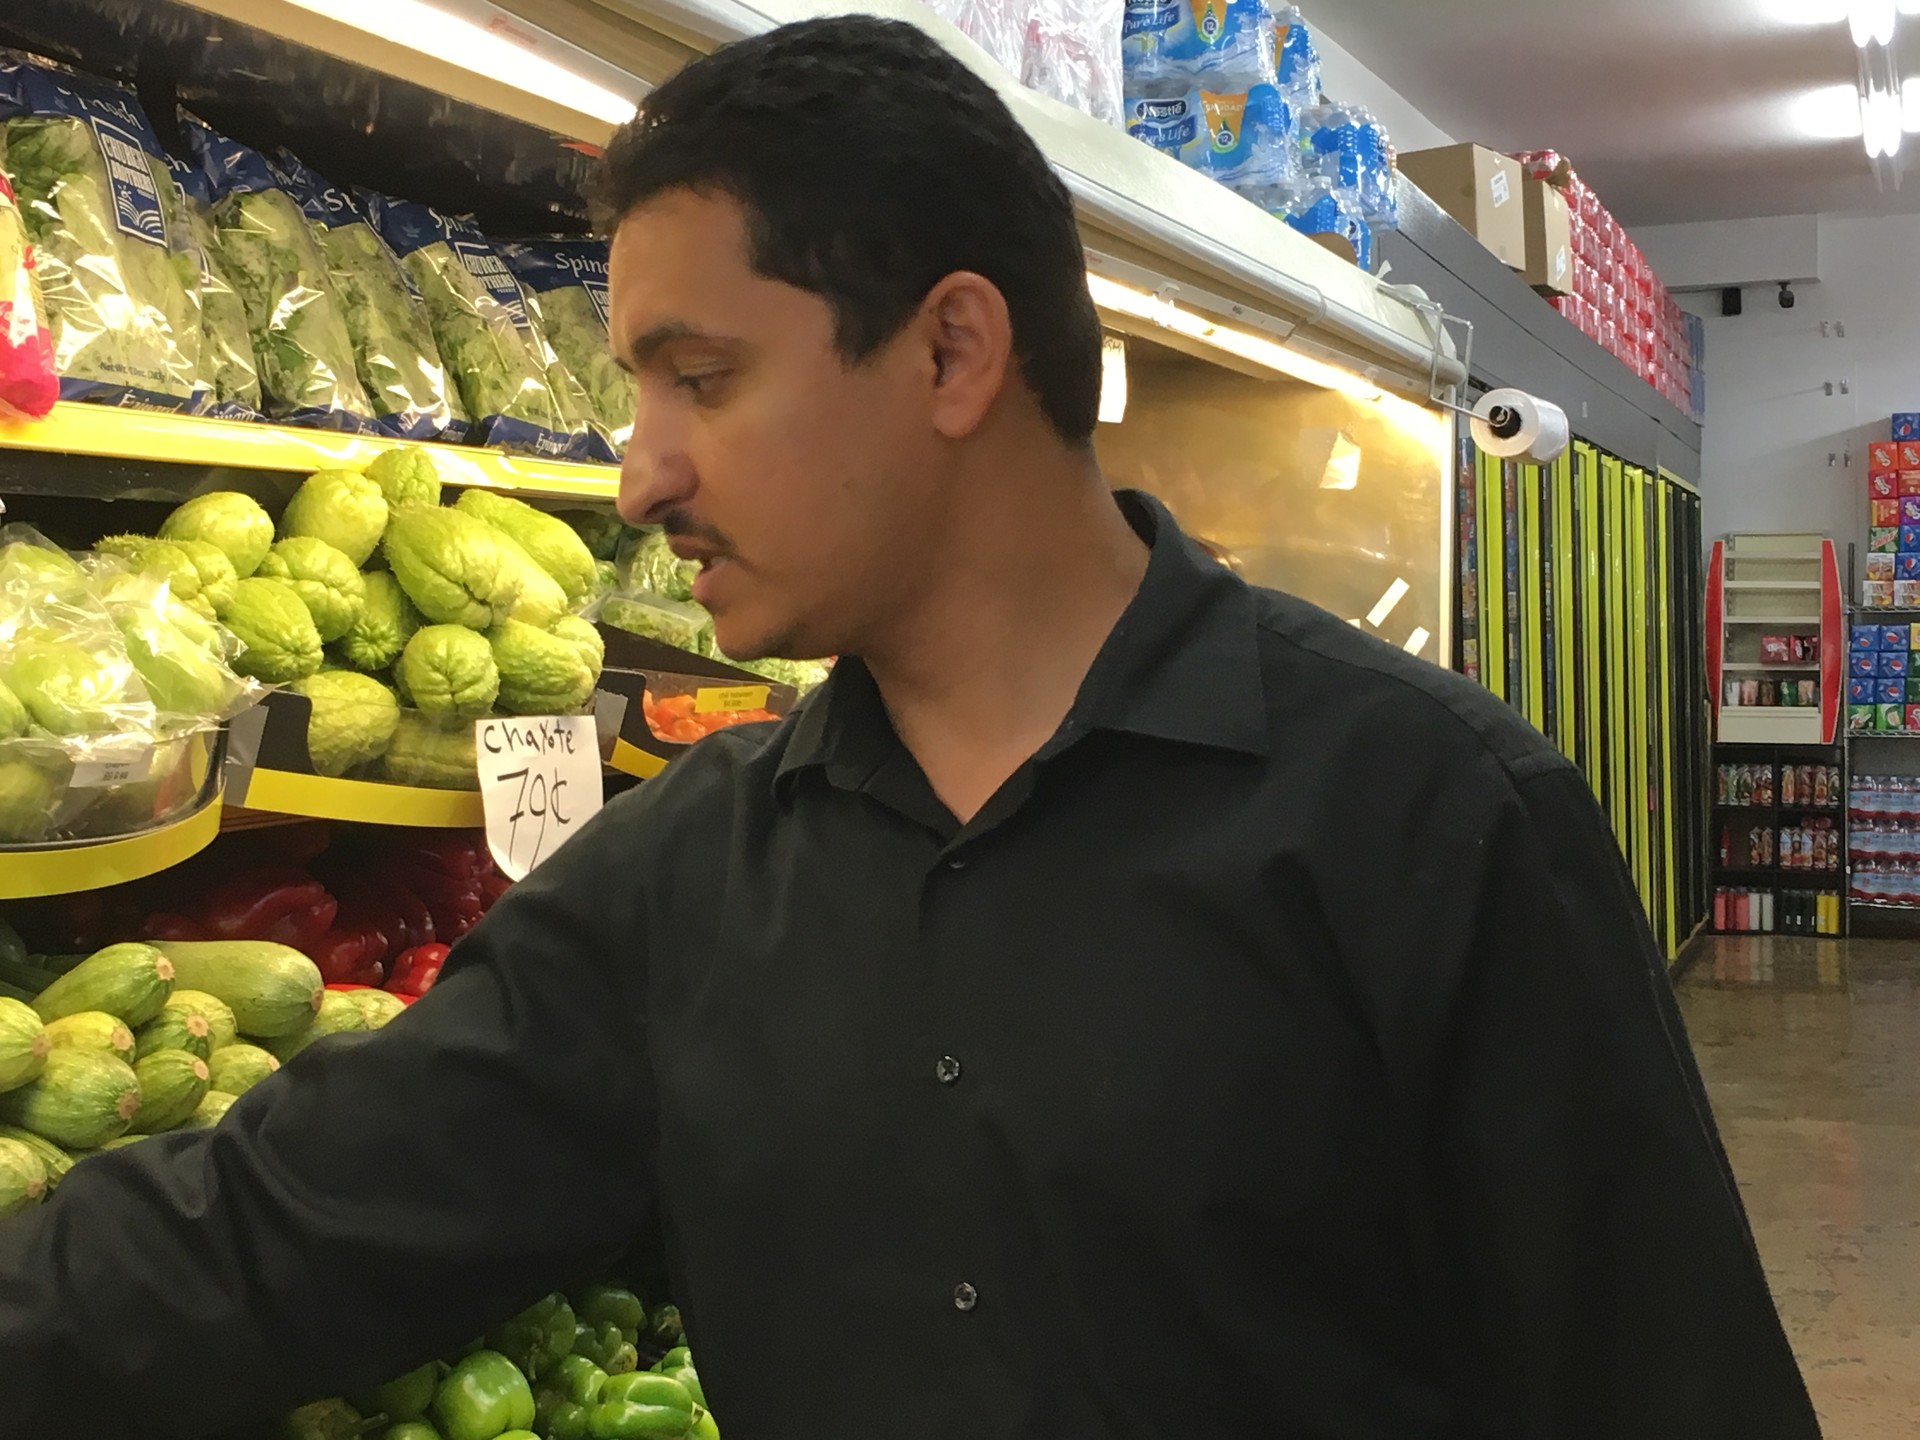 Abdul Taleb, the owner of a small grocery store in Oakland's Fruitvale neighborhood, believes Measure HH could end up driving customers away. Taleb has appeared in ads against the tax.